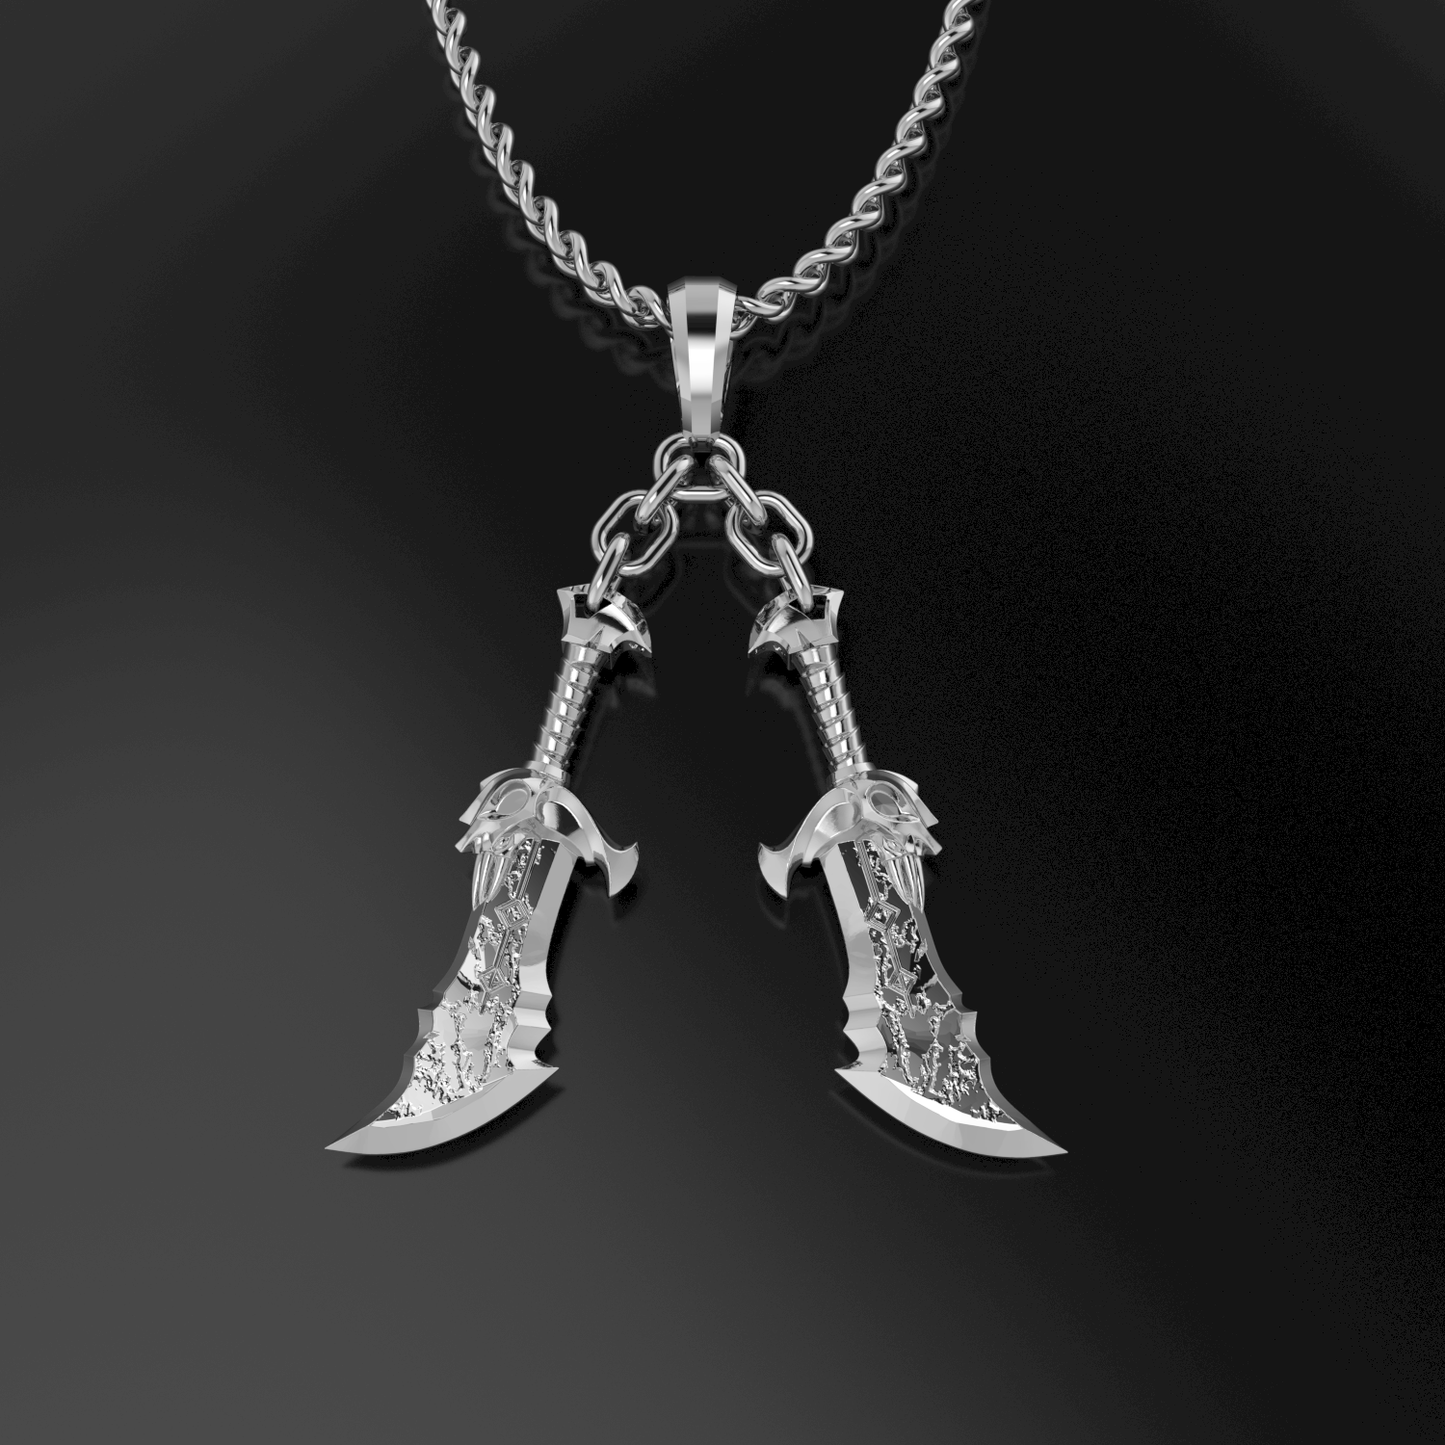 The Blades of Chaos Pendant